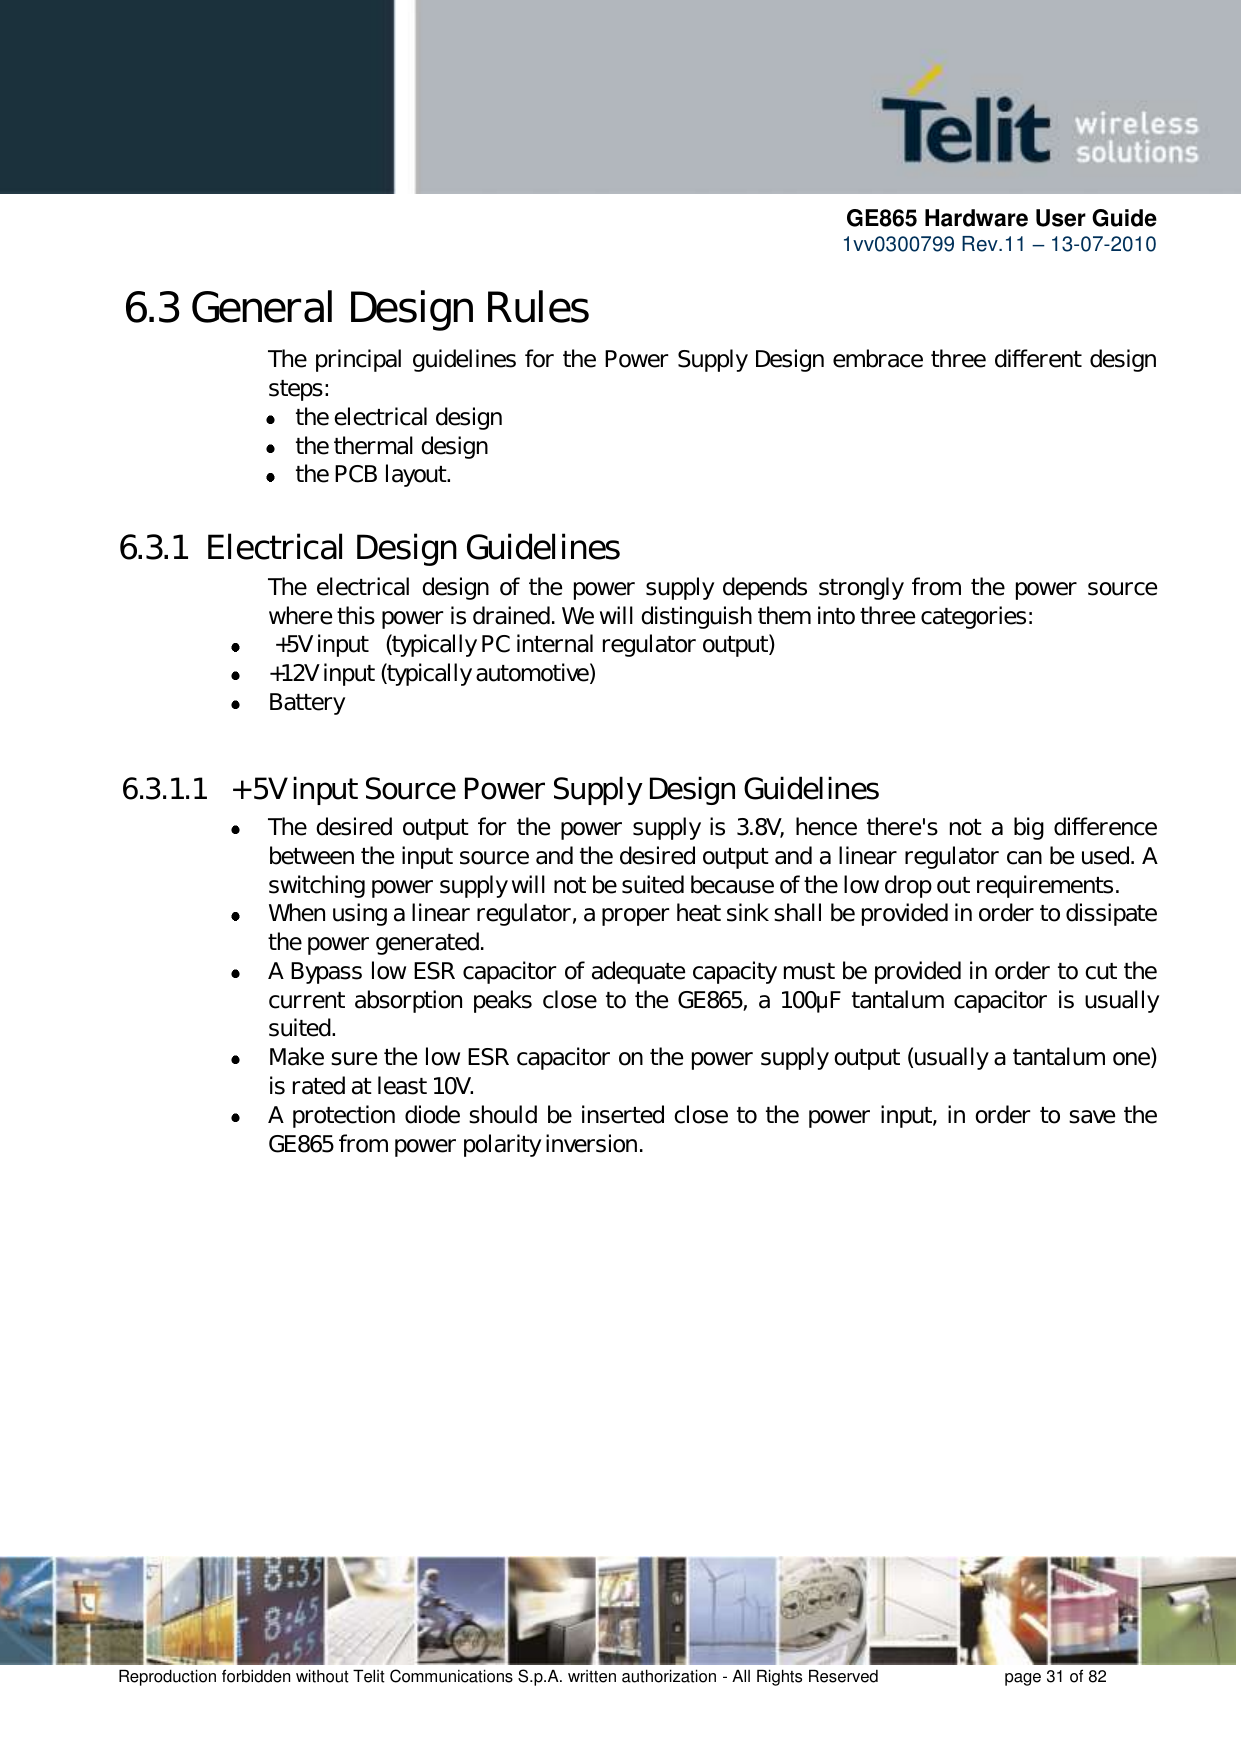      GE865 Hardware User Guide 1vv0300799 Rev.11 – 13-07-2010       Reproduction forbidden without Telit Communications S.p.A. written authorization - All Rights Reserved    page 31 of 82  6.3 General Design Rules The principal guidelines for the Power Supply Design embrace three different design steps:  the electrical design  the thermal design  the PCB layout. 6.3.1  Electrical Design Guidelines The electrical design of the power  supply depends strongly from the  power source where this power is drained. We will distinguish them into three categories:   +5V input   (typically PC internal regulator output)  +12V input (typically automotive)  Battery  6.3.1.1  + 5V input Source Power Supply Design Guidelines  The desired output for the power supply is 3.8V, hence there&apos;s not a big difference between the input source and the desired output and a linear regulator can be used. A switching power supply will not be suited because of the low drop out requirements.  When using a linear regulator, a proper heat sink shall be provided in order to dissipate the power generated.  A Bypass low ESR capacitor of adequate capacity must be provided in order to cut the current absorption peaks close to the GE865, a 100μF tantalum capacitor is usually suited.  Make sure the low ESR capacitor on the power supply output (usually a tantalum one) is rated at least 10V.  A protection diode should be inserted close to the power input, in order to save the GE865 from power polarity inversion. 